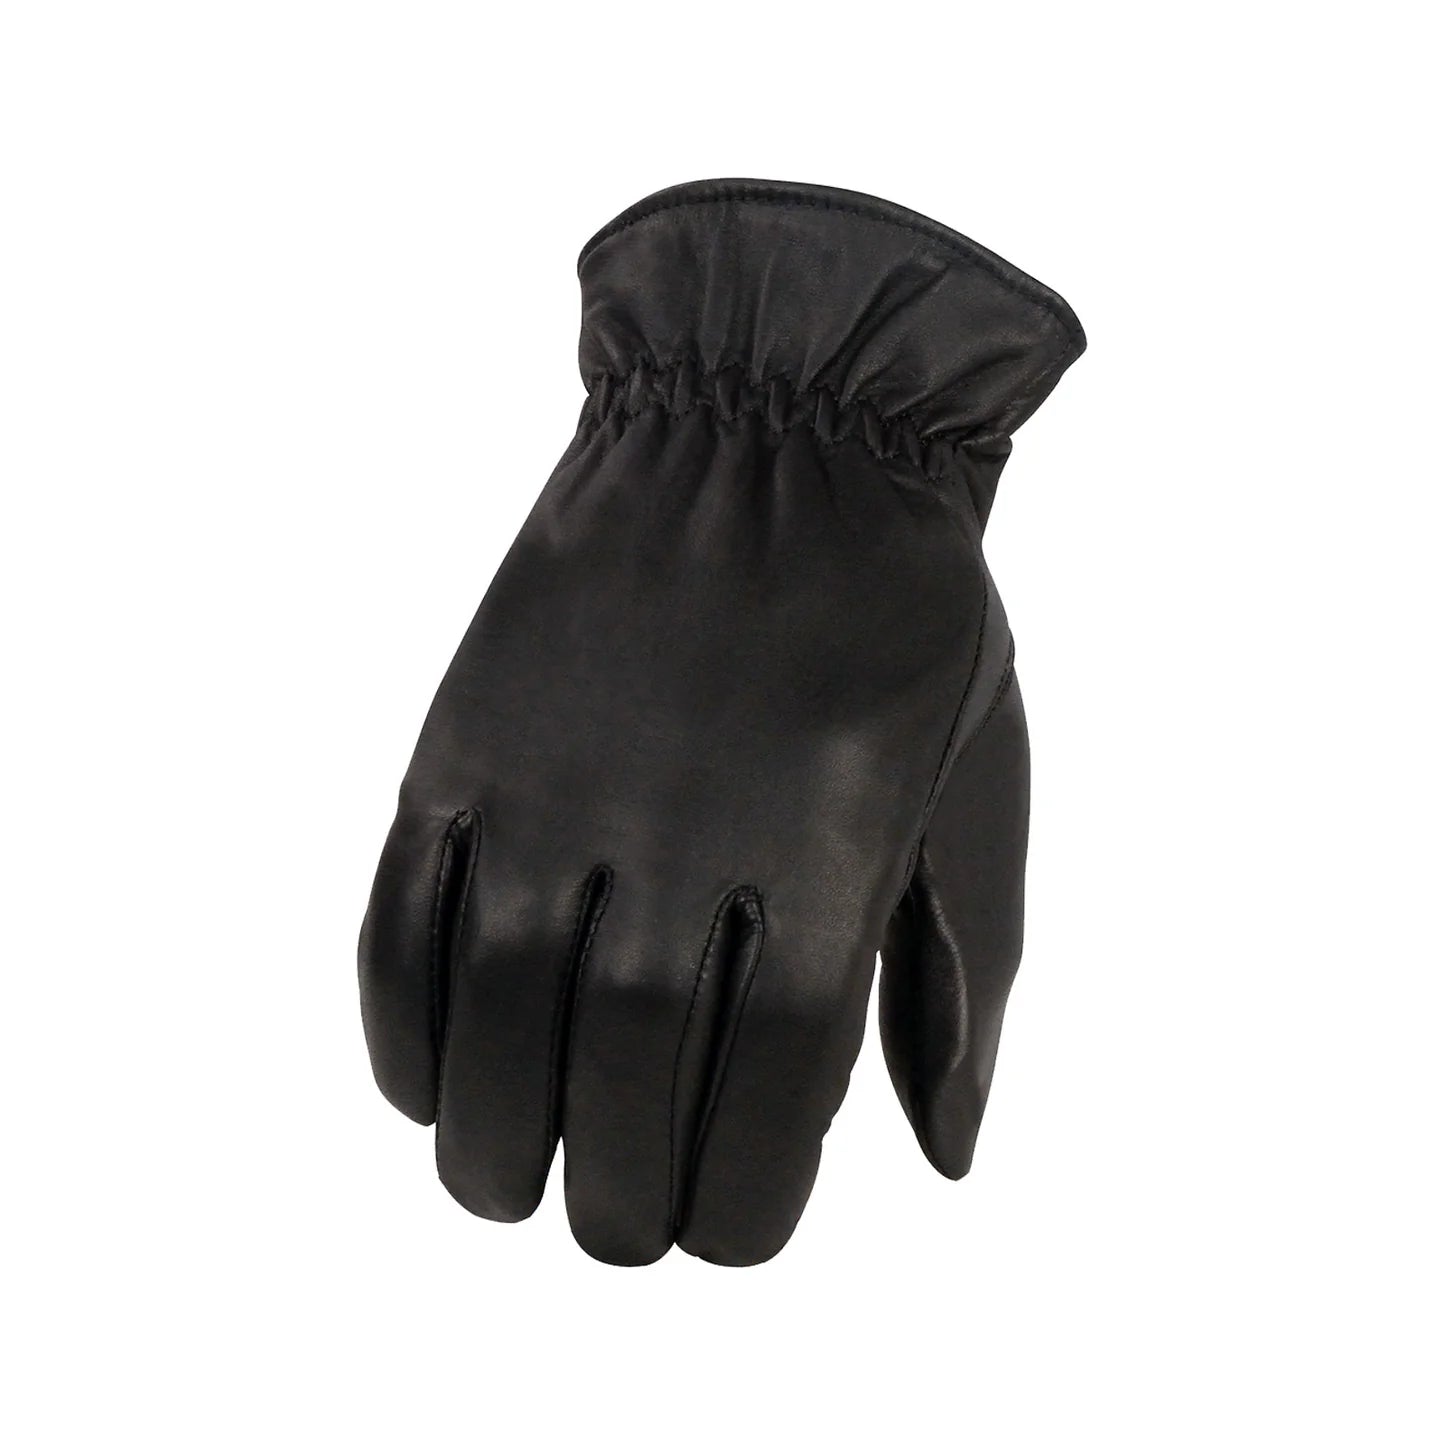 Men's Black Leather Thermal Lined Gloves with Cinch Wrist